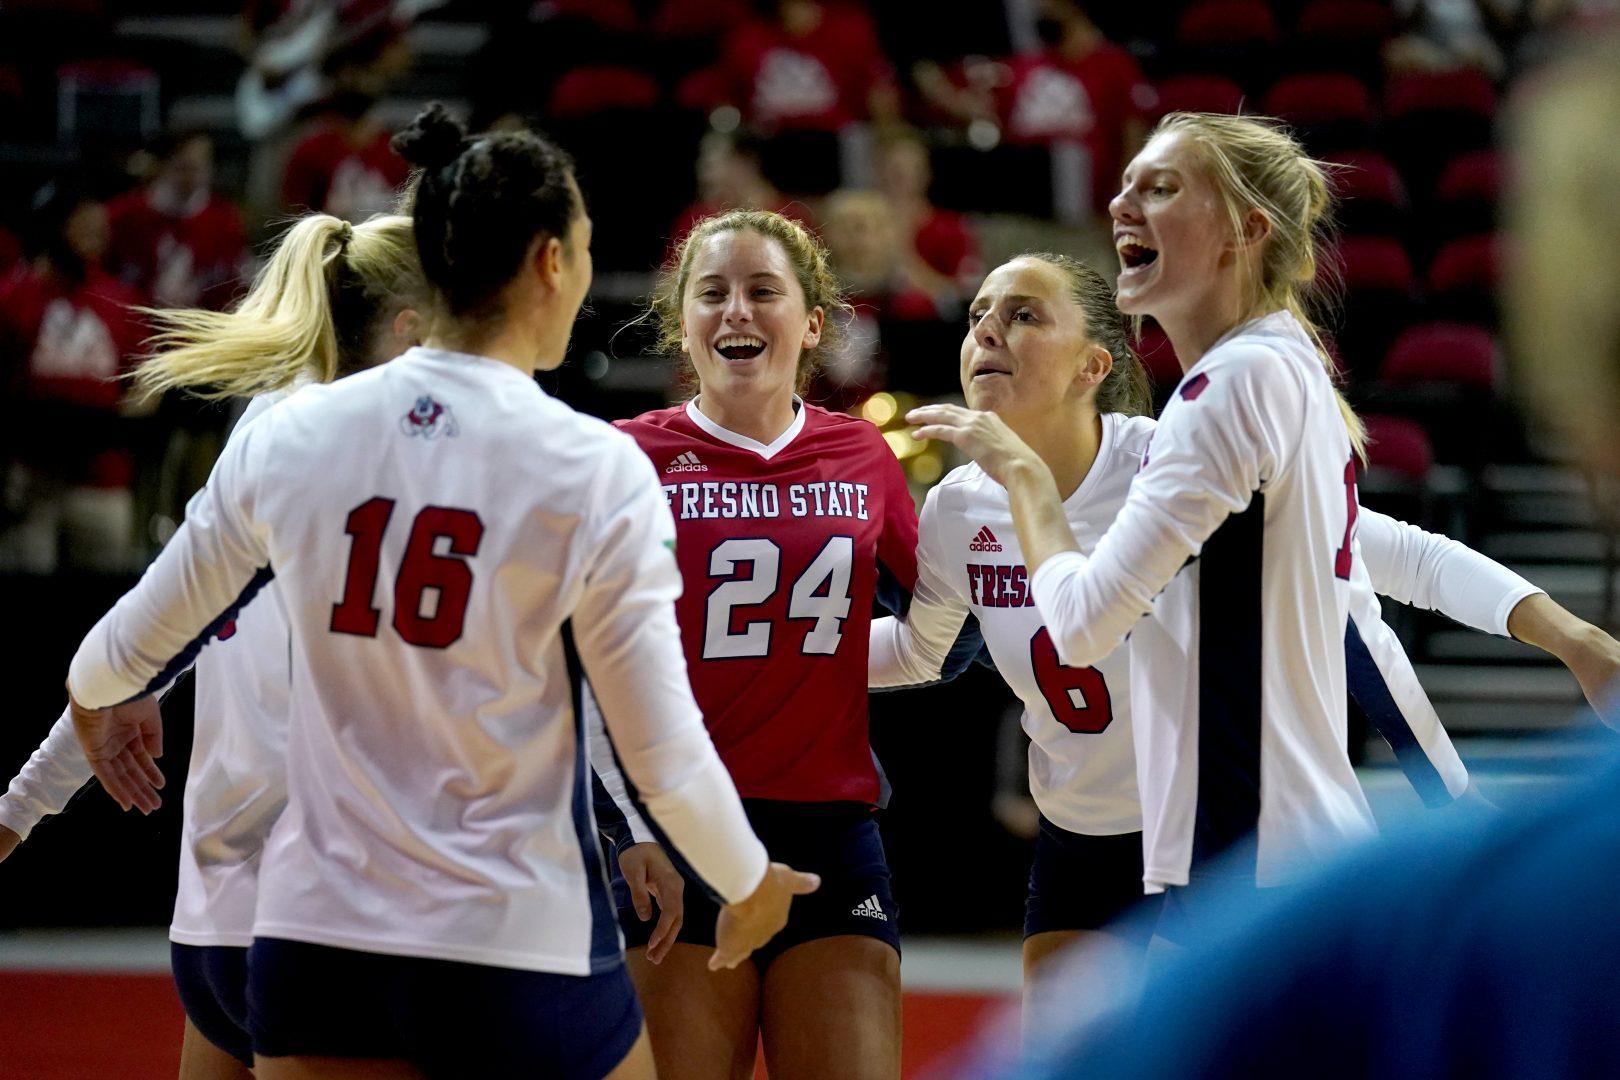 Fresno+State+volleyball+team+celebrates+victory+against+Colorado+State+on+Thursday%2C+Sept.+30%2C+2021%2C+at+the+Save+Mart+Center.+%28Courtesy+of+Fresno+State+Athletics%29